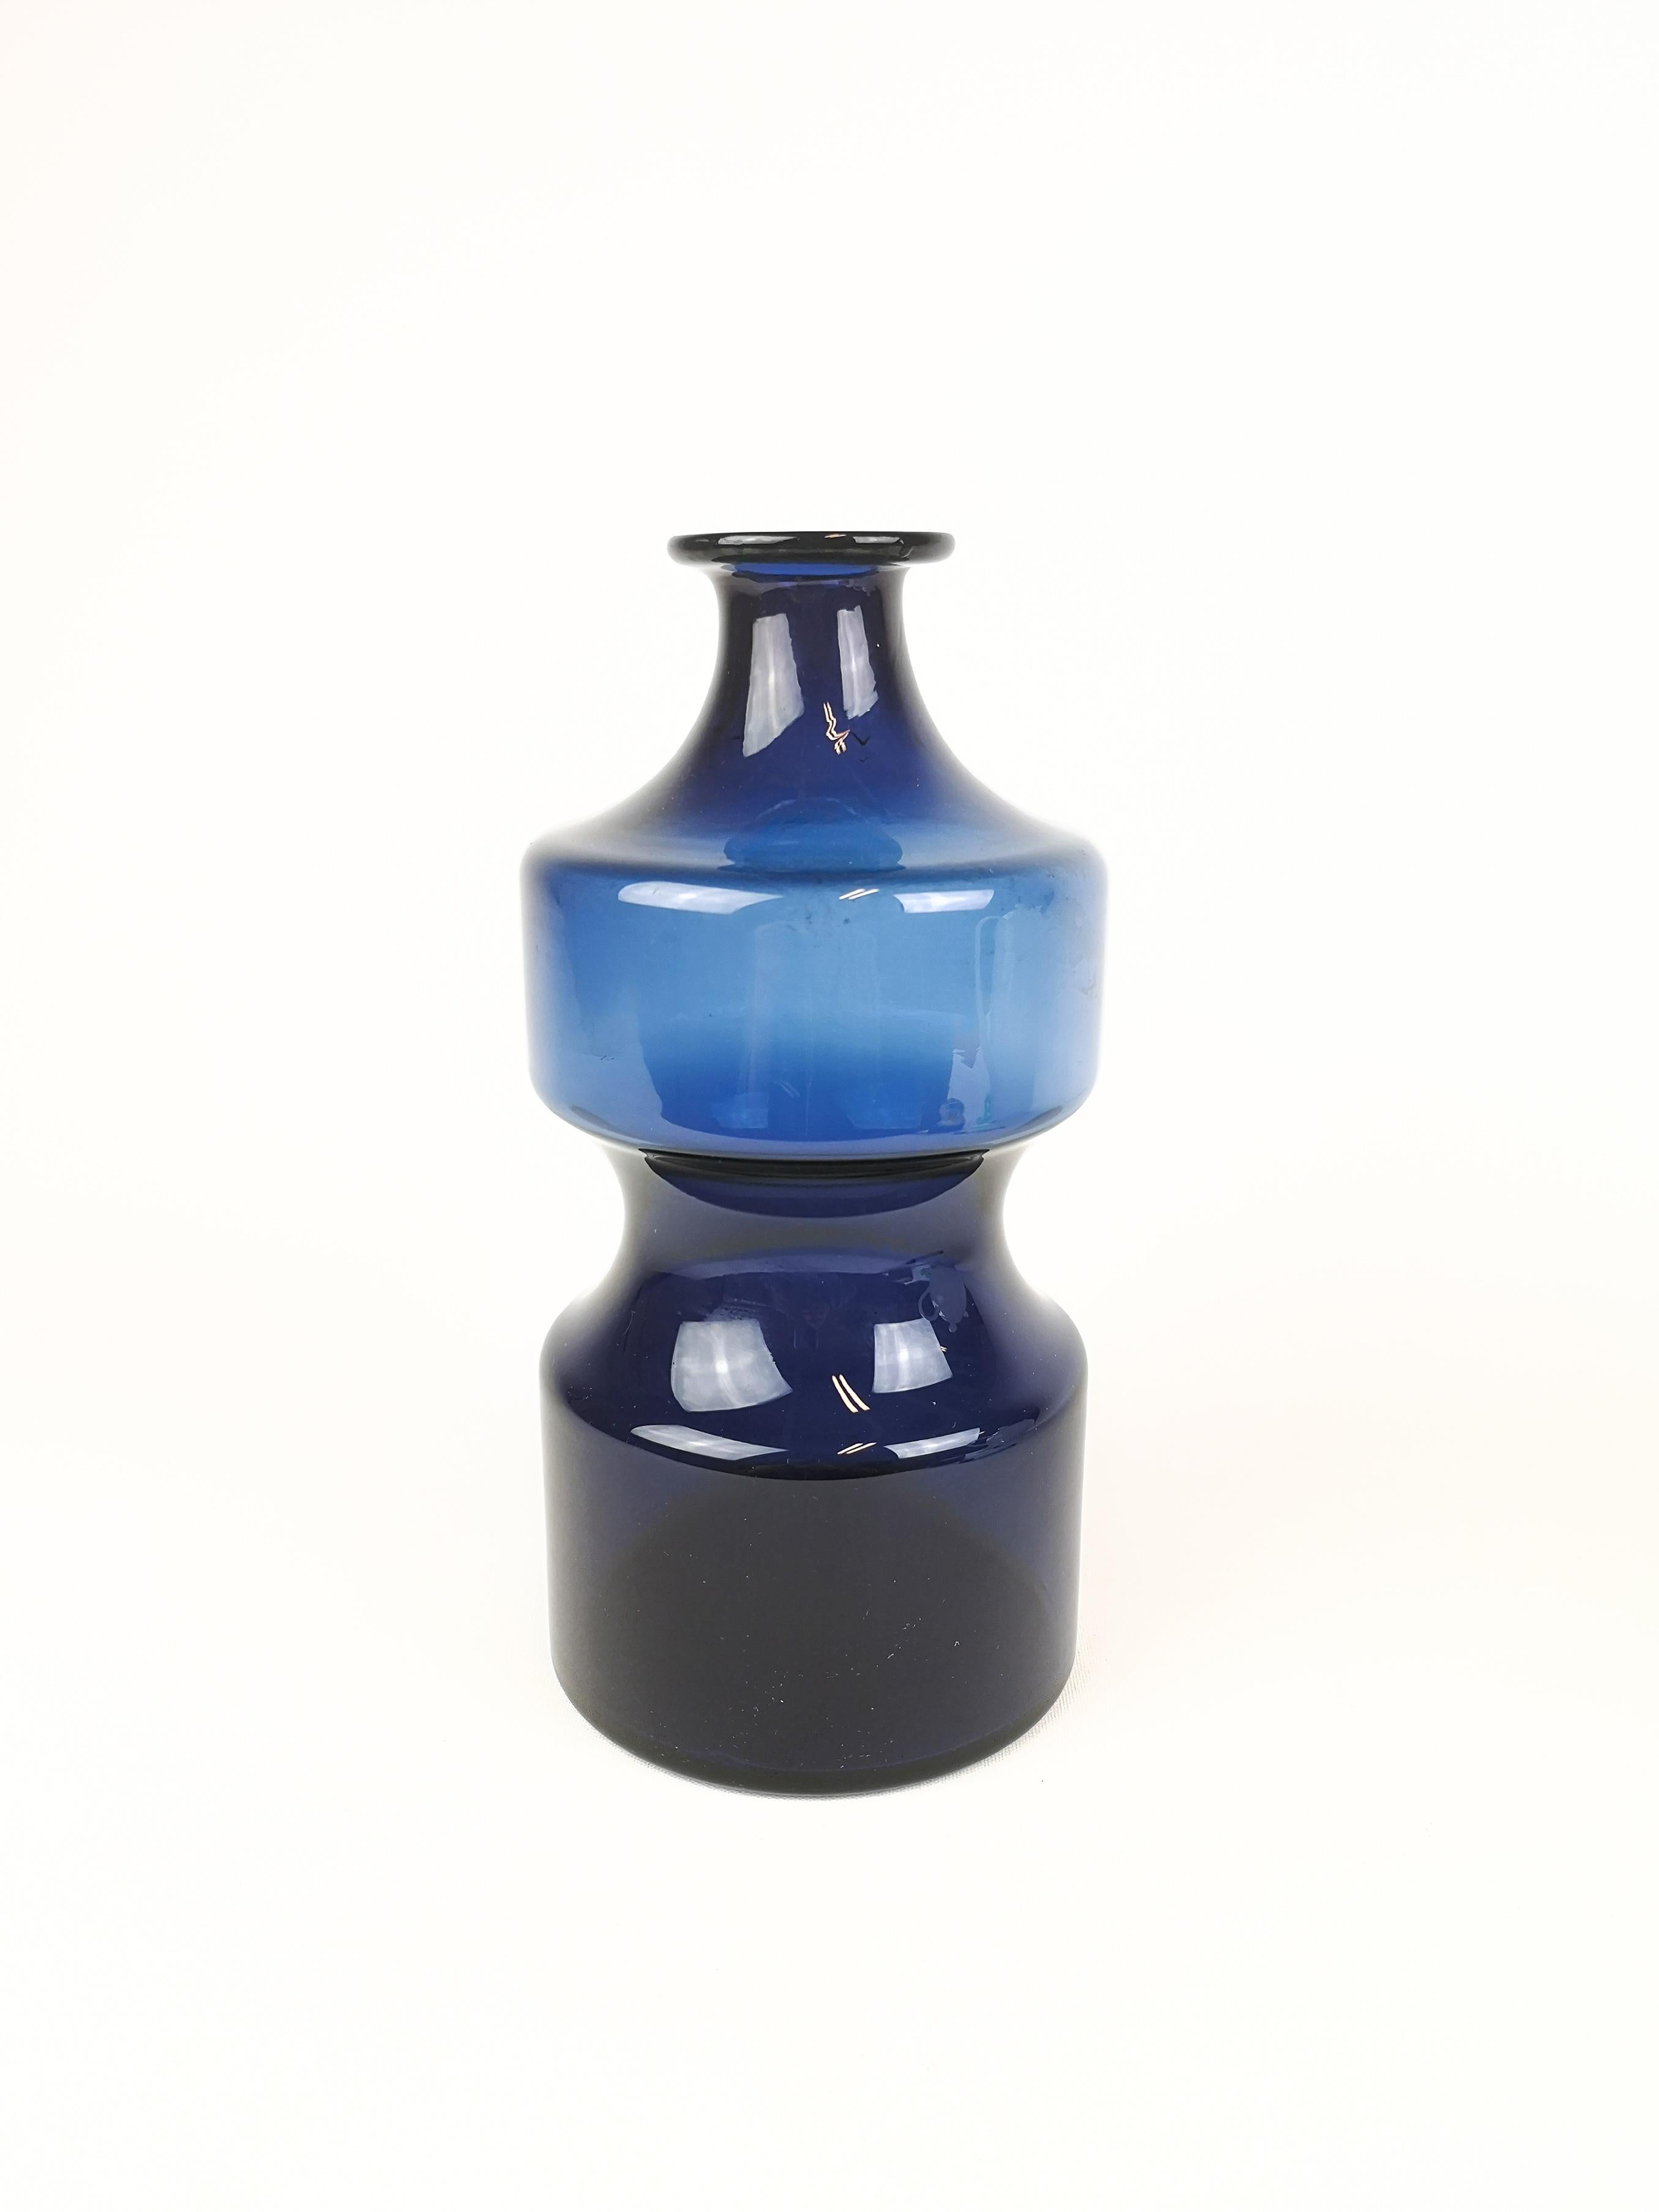 A great looking blue vase created by Timo Sarpaneva for Iittala in the 1970s. Singed T.S under bottom.

Measures: H 25 cm, D 13 cm.
 